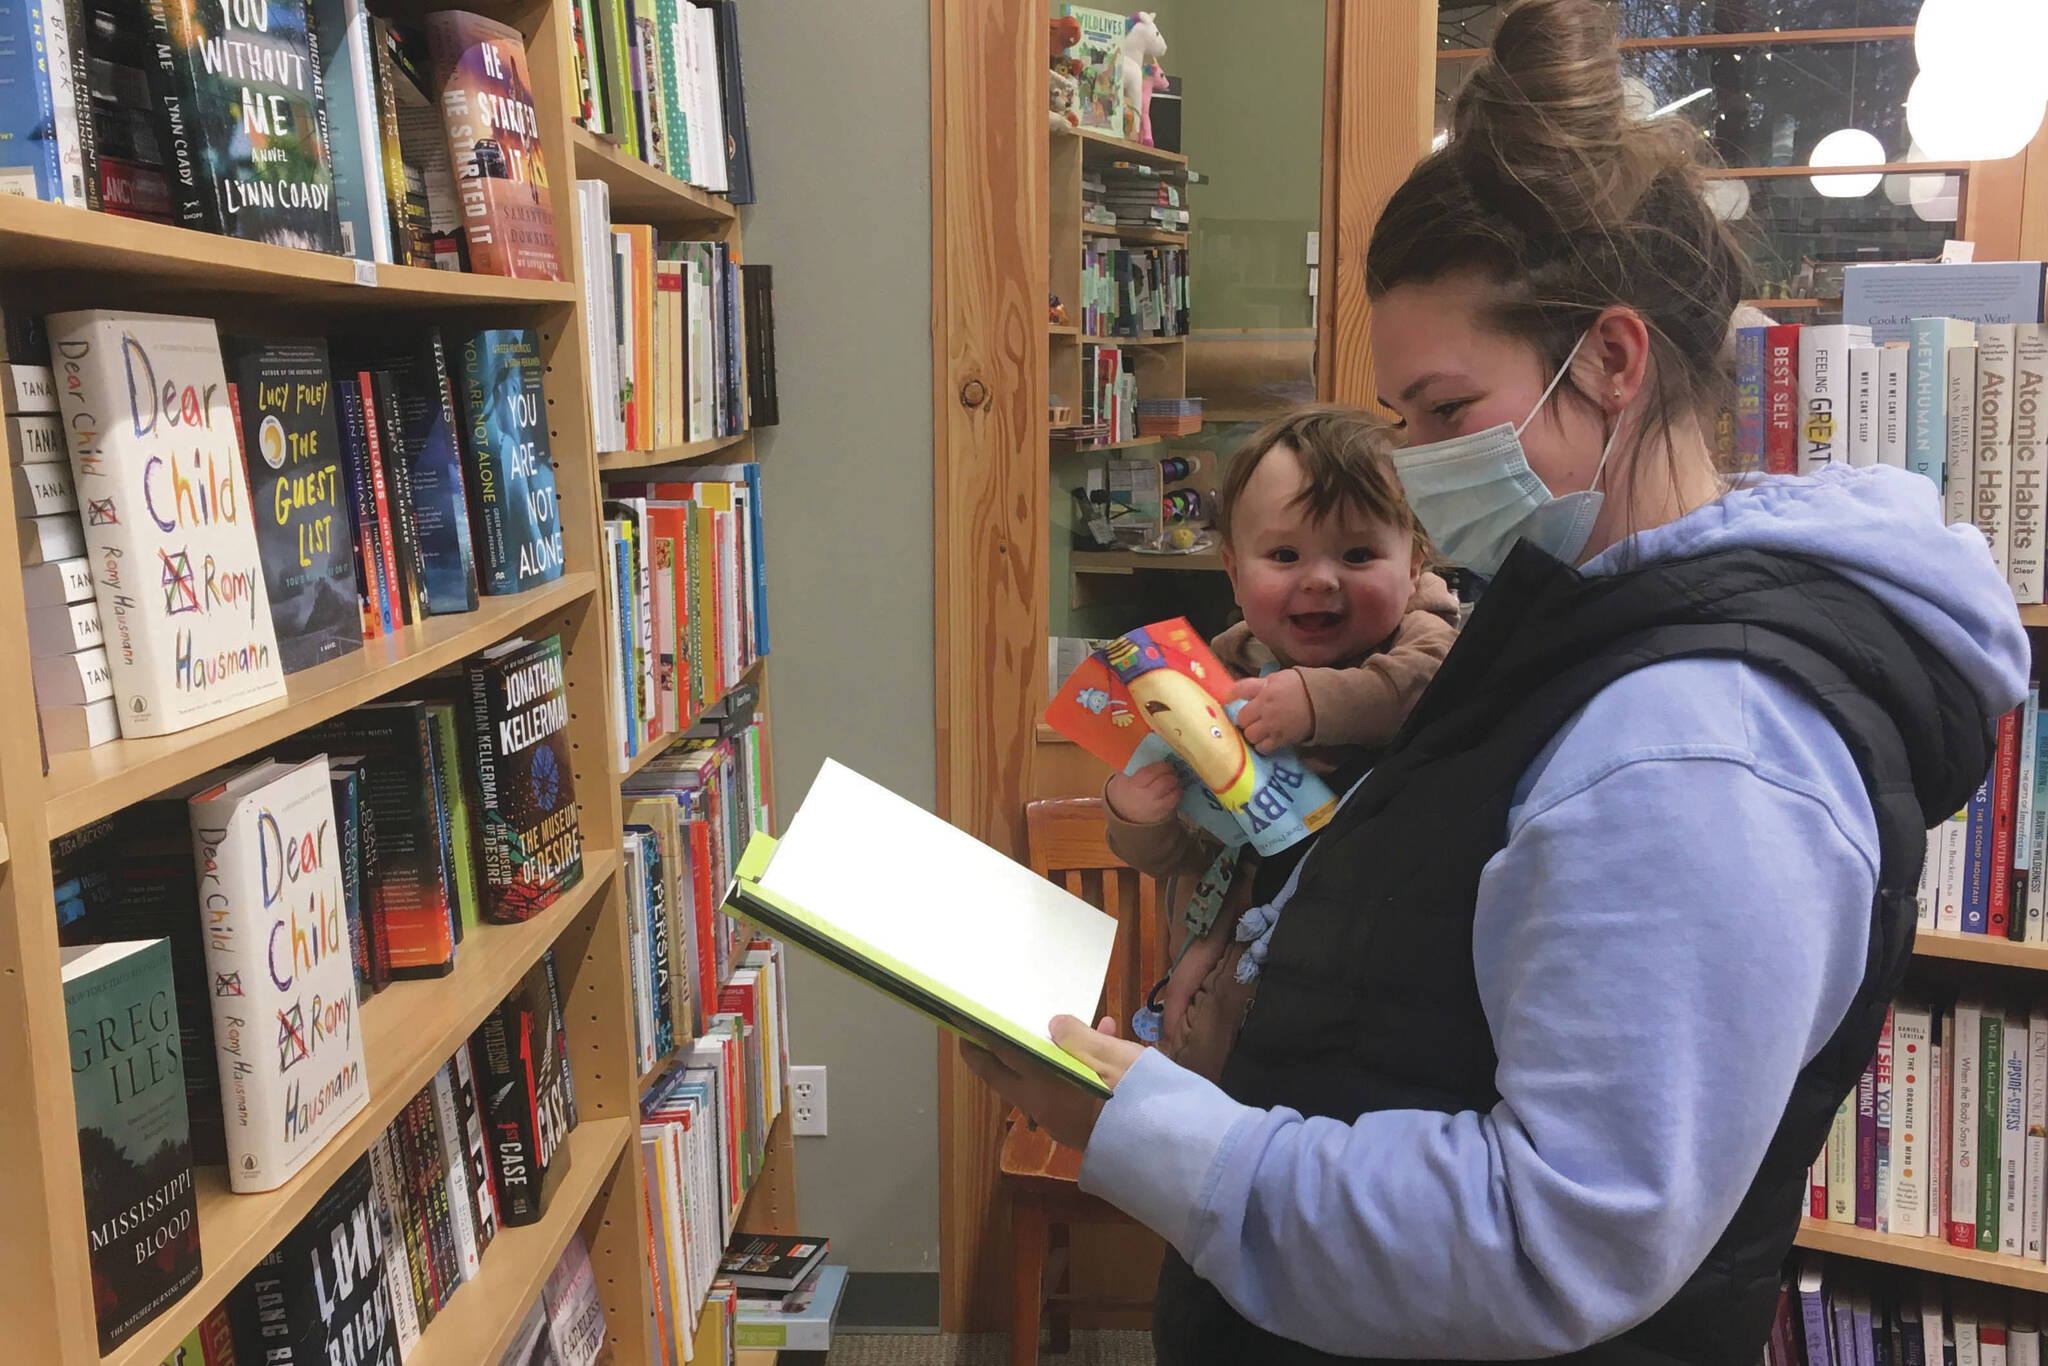 Jessie Duke, of Soldotna, browses books with 7-month-old Danny Dommek on Monday, Nov. 16, 2020, at River City Books in Soldotna, Alaska. (Photo by Jeff Helminiak/Peninsula Clarion)